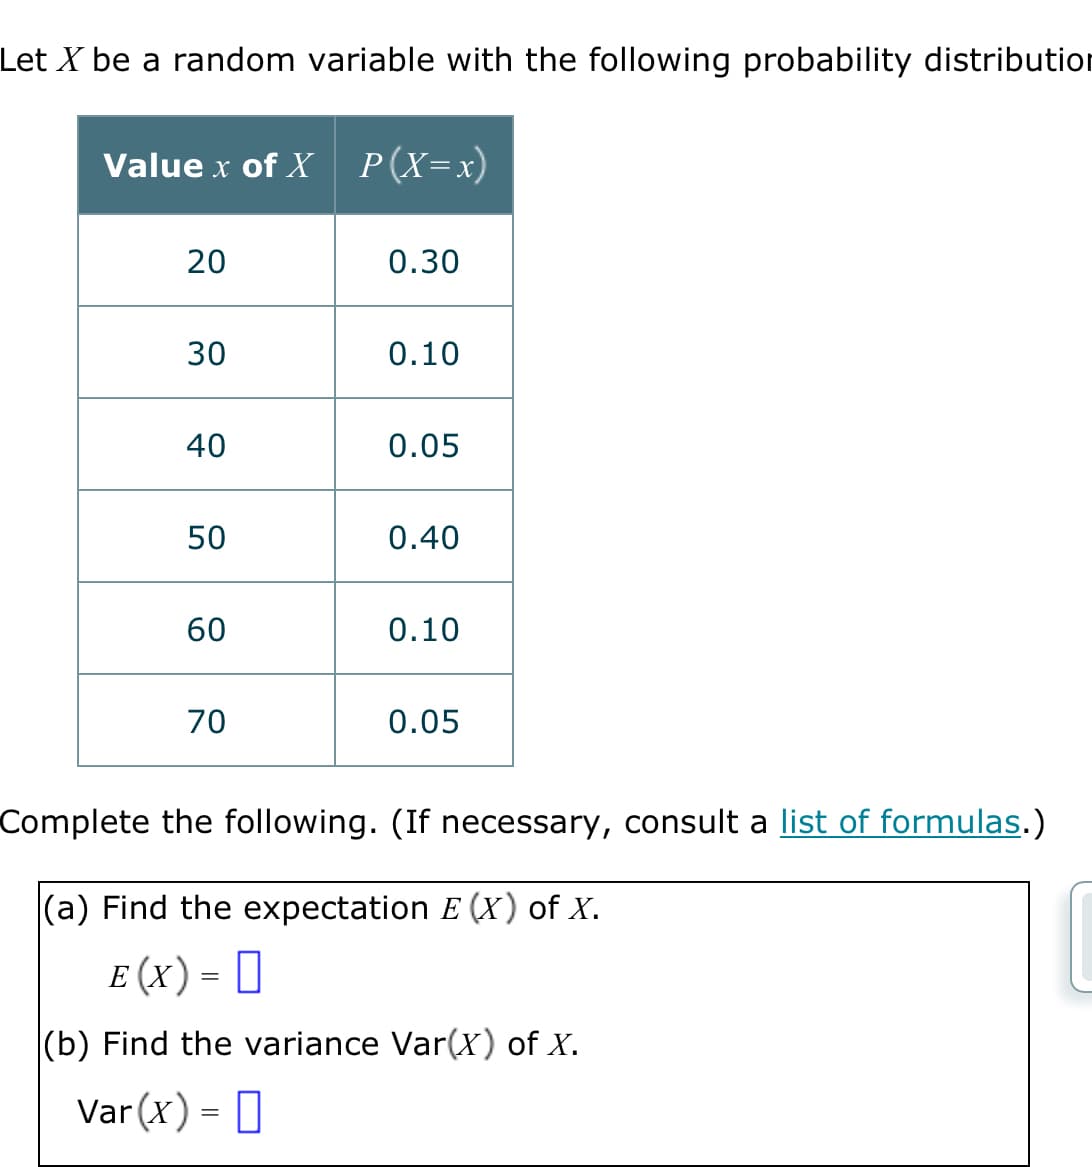 Let X be a random variable with the following probability distribution
Value x of X P(X=x)
20
30
40
50
60
70
0.30
0.10
0.05
0.40
0.10
0.05
Complete the following. (If necessary, consult a list of formulas.)
(a) Find the expectation E (X) of X.
E (X) = 0
(b) Find the variance Var(x) of X.
Var (x) =